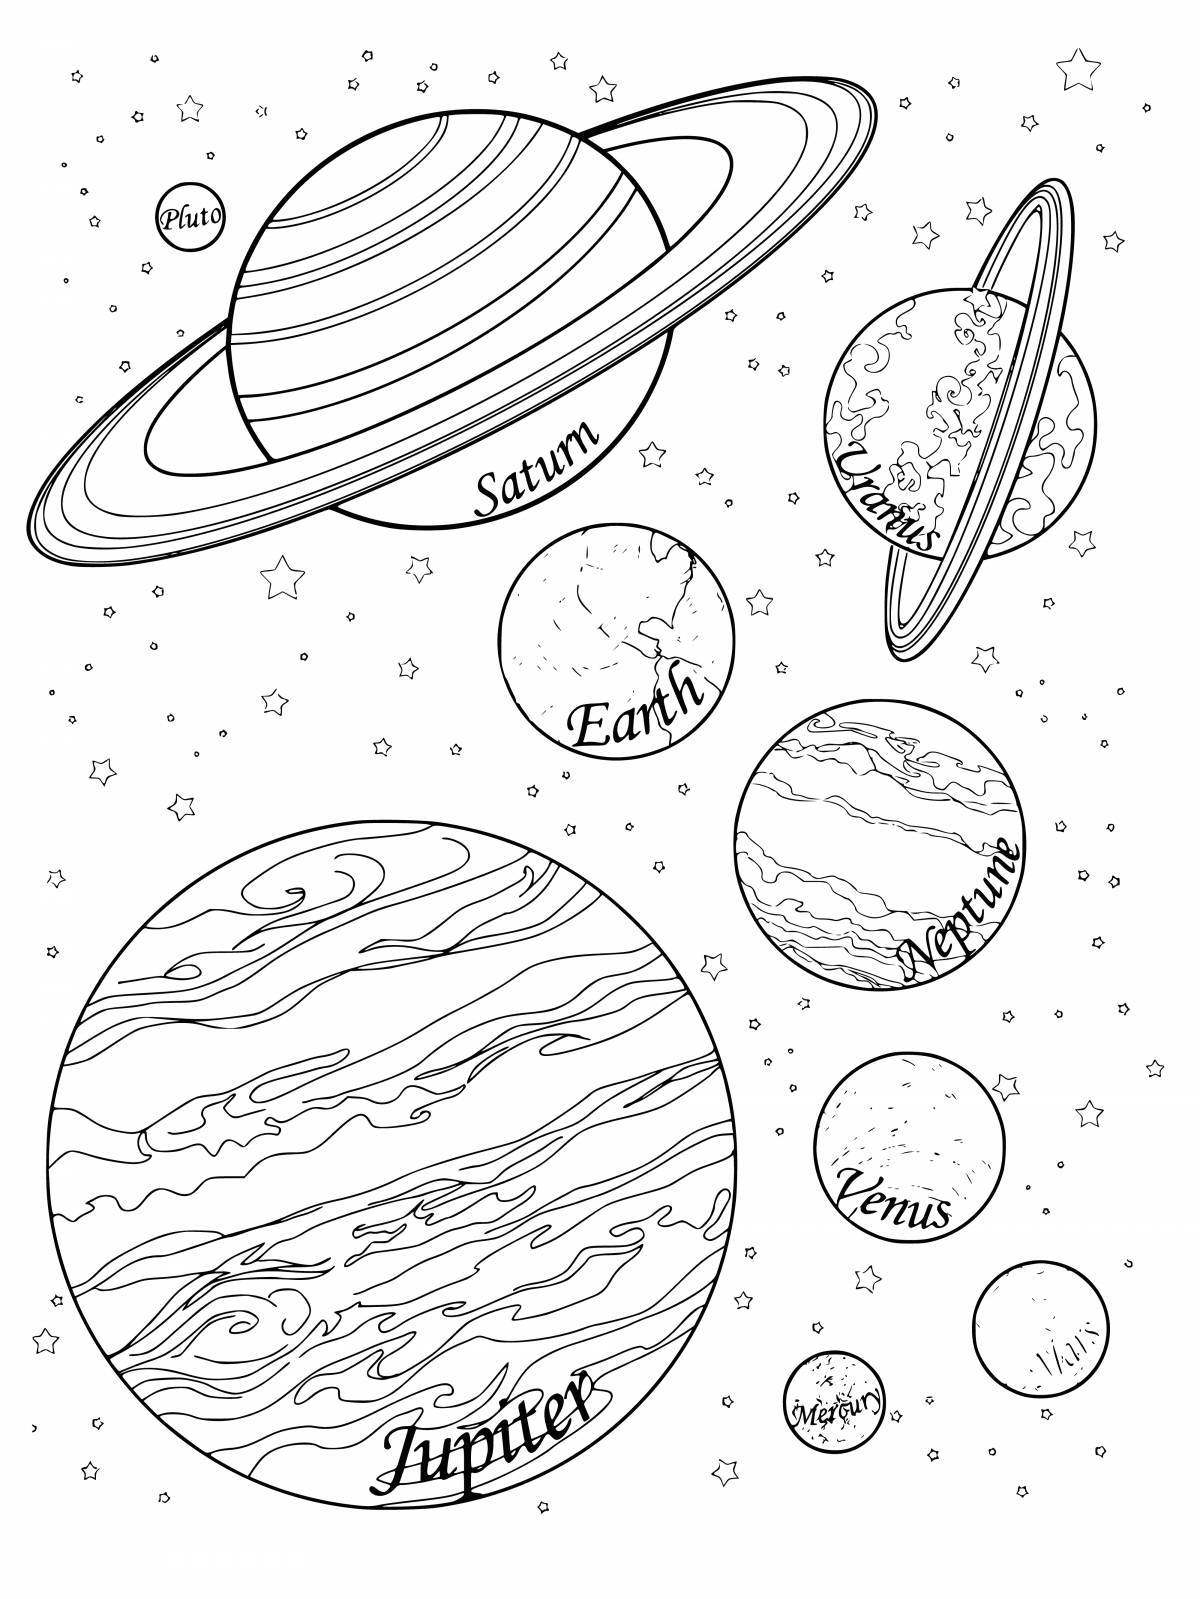 Planets for kids #14